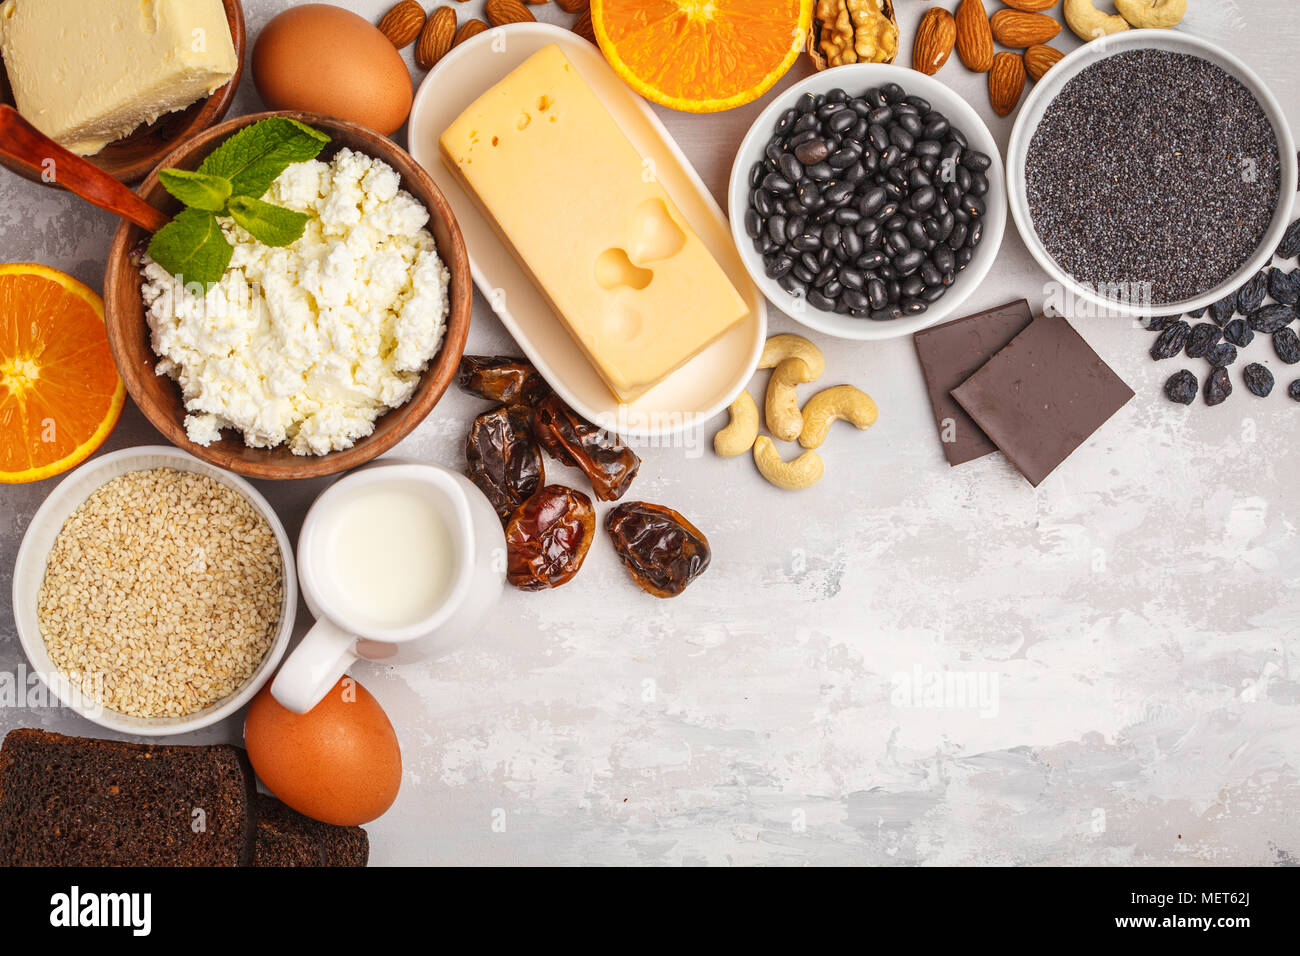 Healthy food nutrition dieting concept. Assortment of high calcium sources. Dairy products, legumes, eggs, nuts, chocolate, poppy, sesame, chocolate. Stock Photo